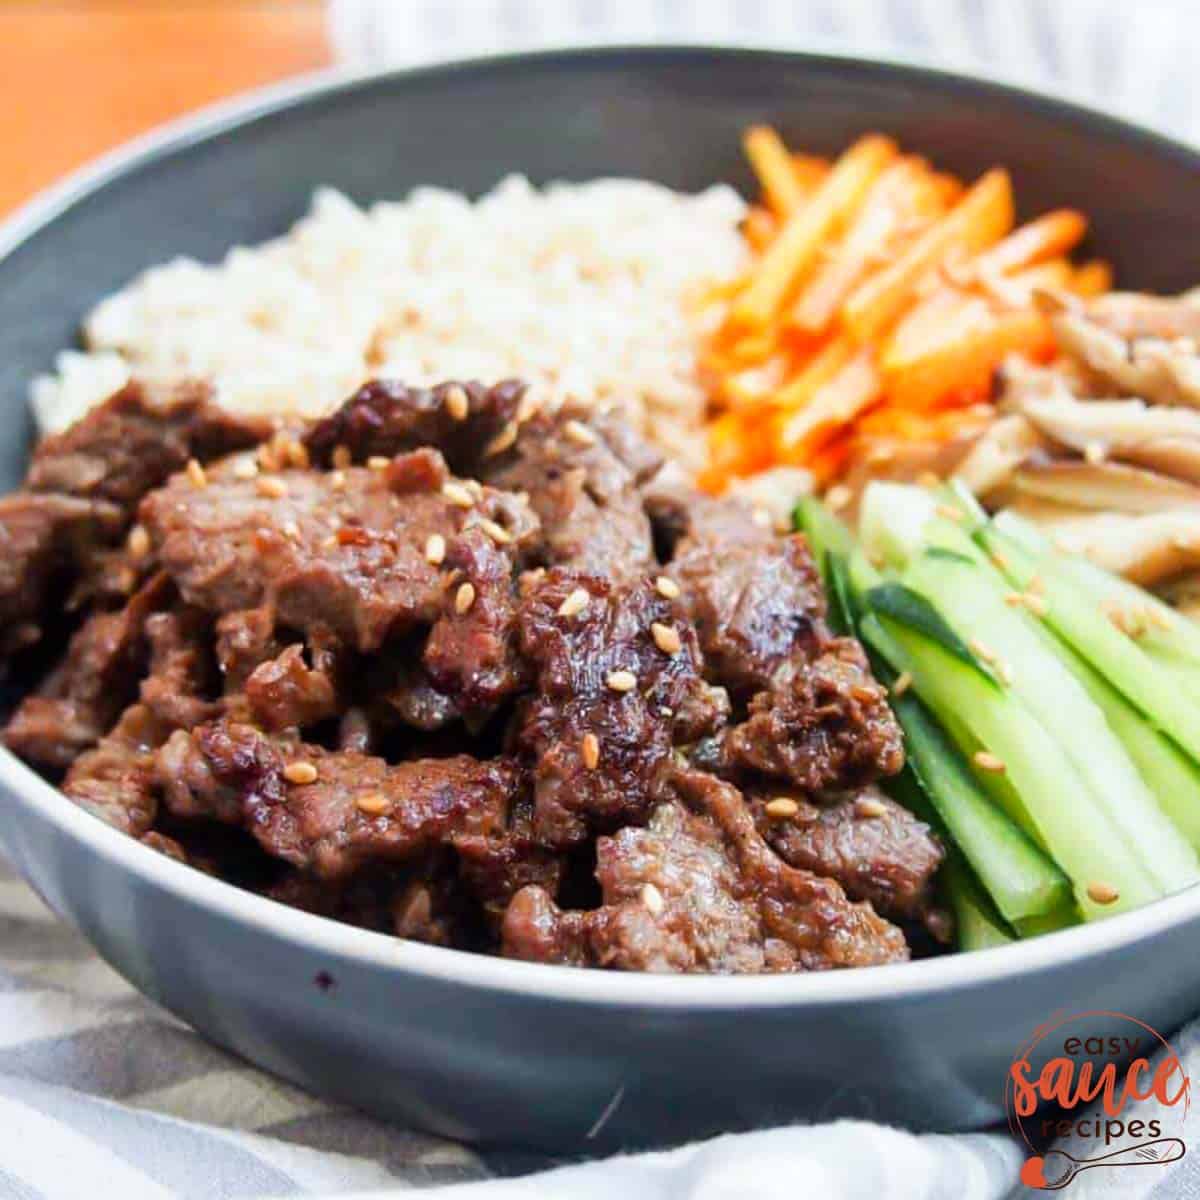 bulgogi marinated beef in a bowl with rice, mushrooms, carrots, and cucumbers, up close